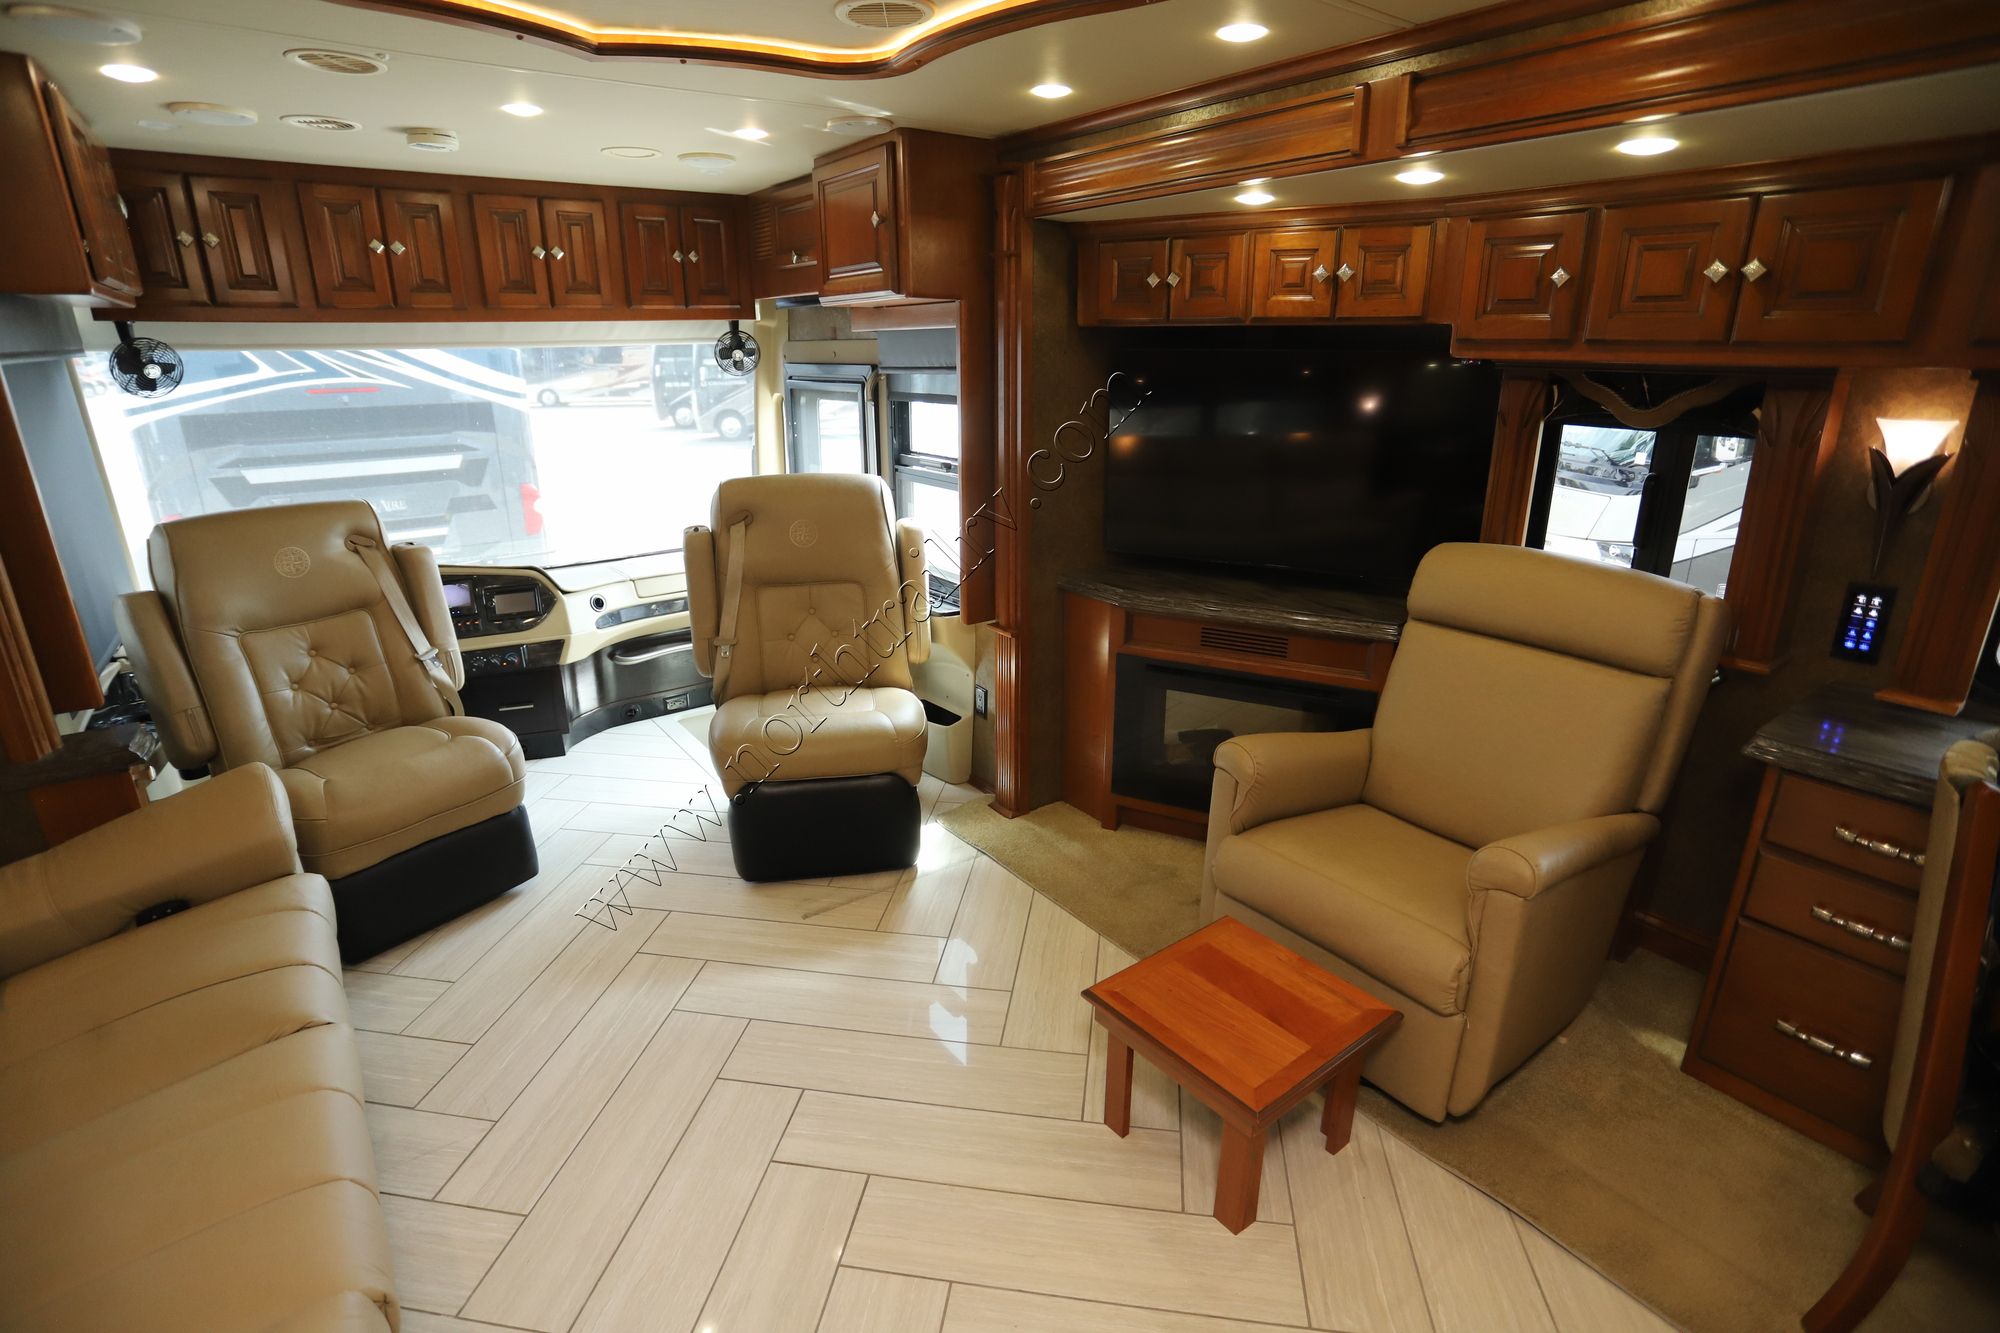 Used 2015 Tiffin Motor Homes Allegro Bus 40SP Class A  For Sale